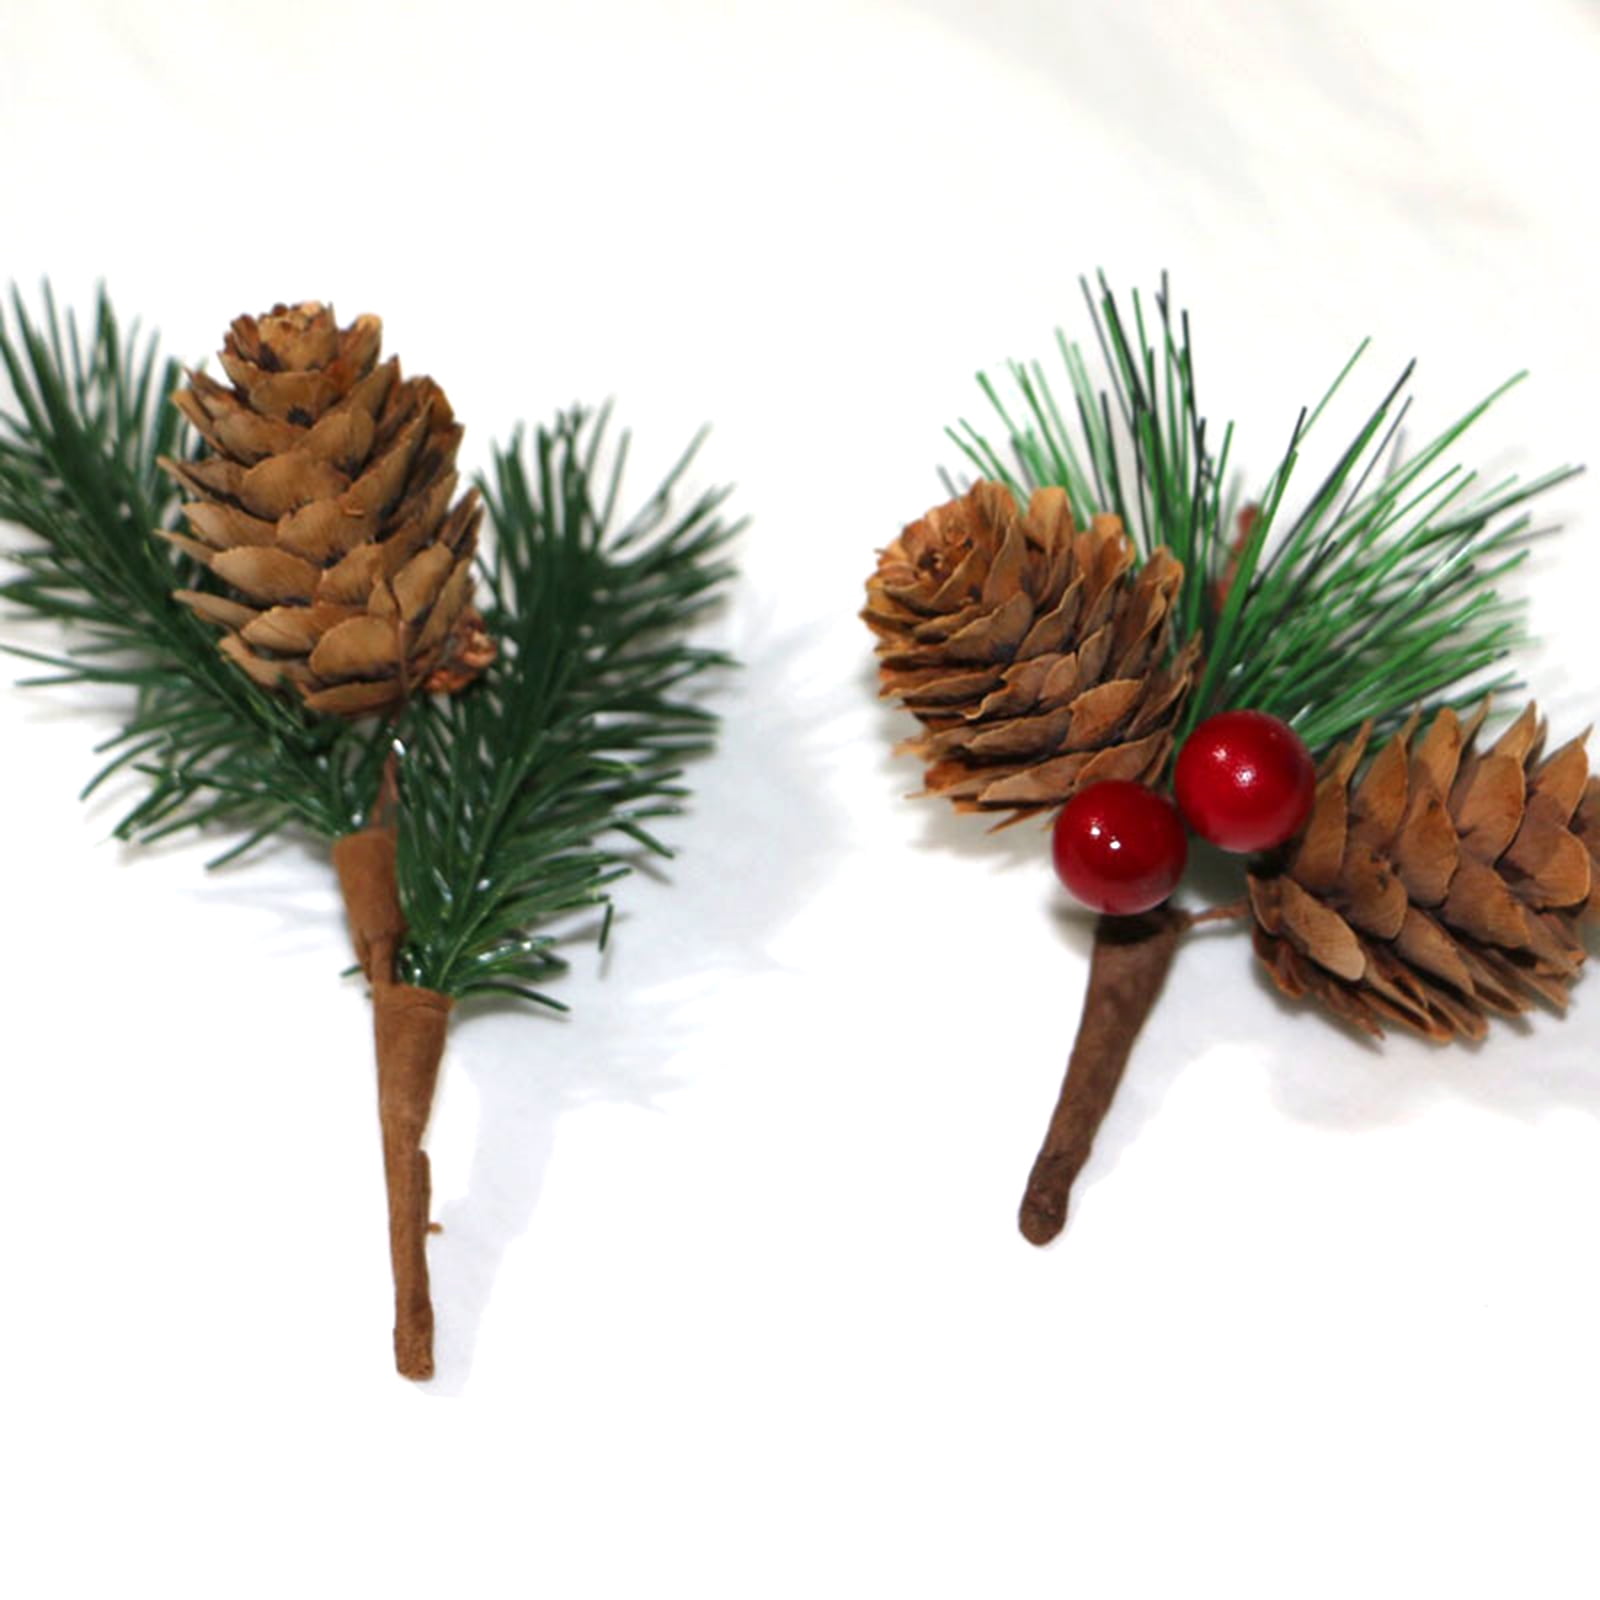 Our mini pine trees are back 🎄 - Spruce Floral Designs